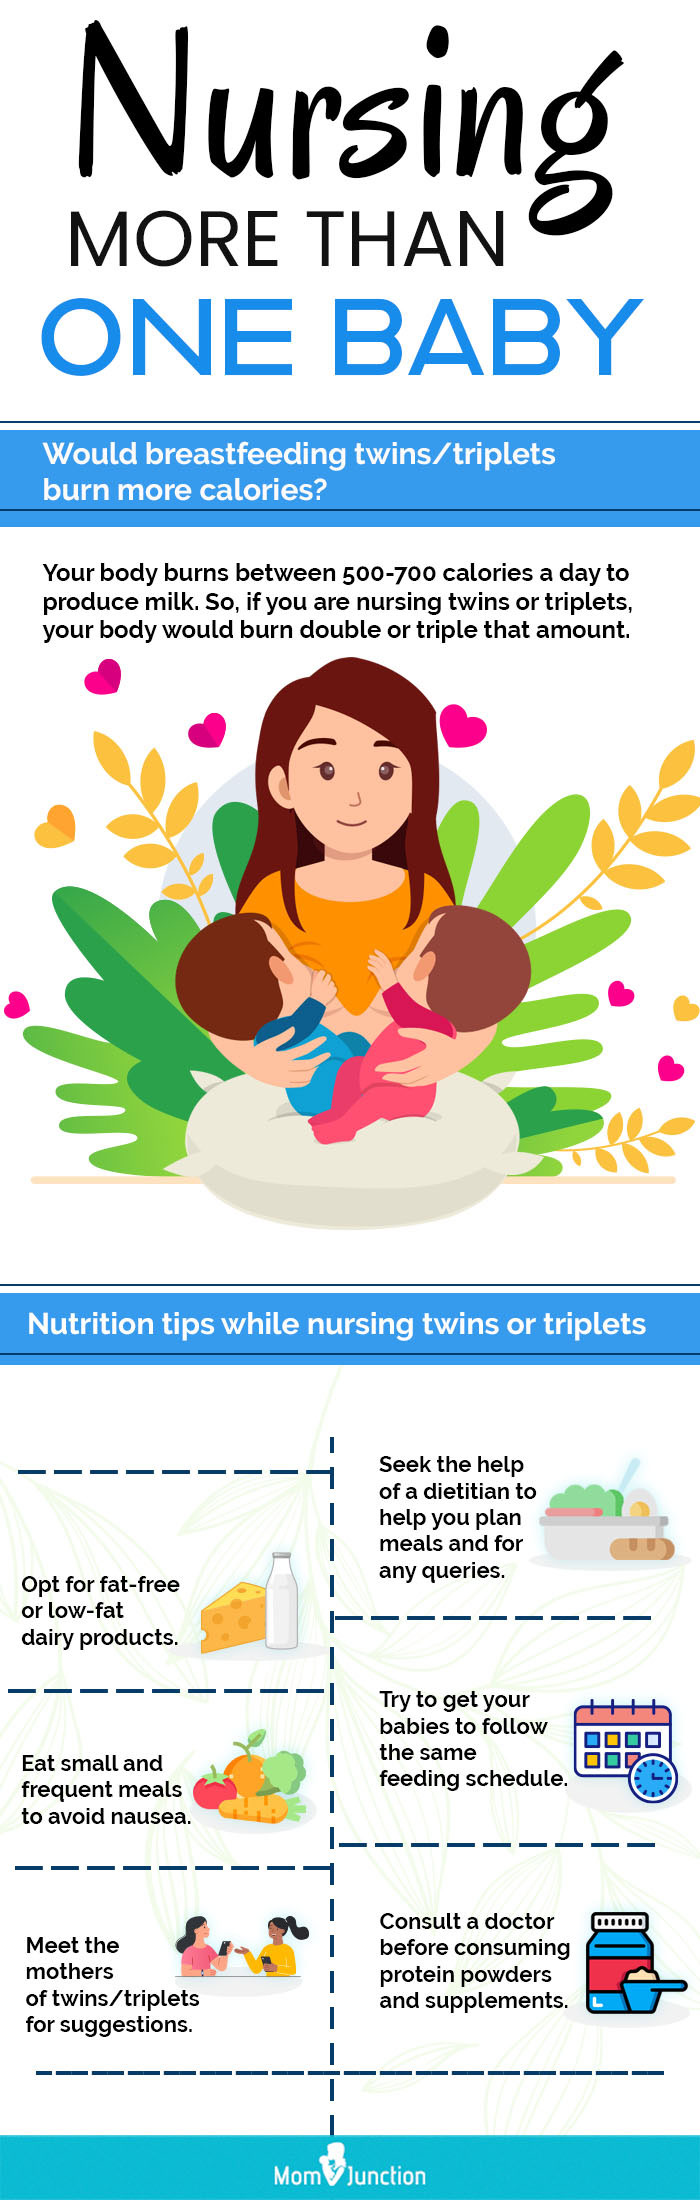 nursing more than one baby [infographic]